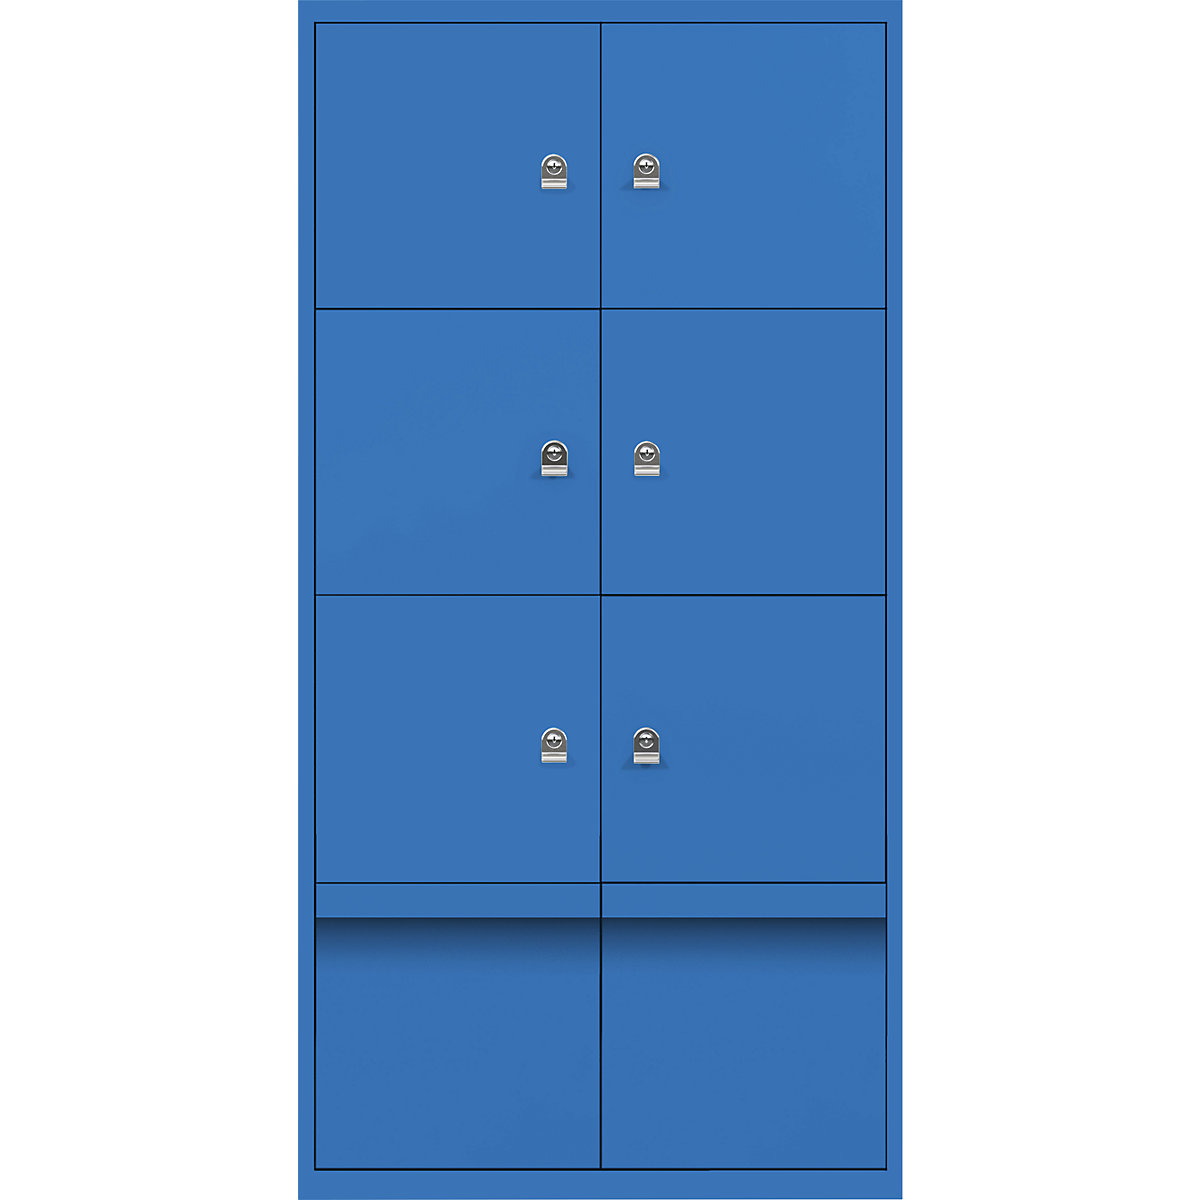 BISLEY – LateralFile™ lodge, with 6 lockable compartments and 2 drawers, height 375 mm each, blue